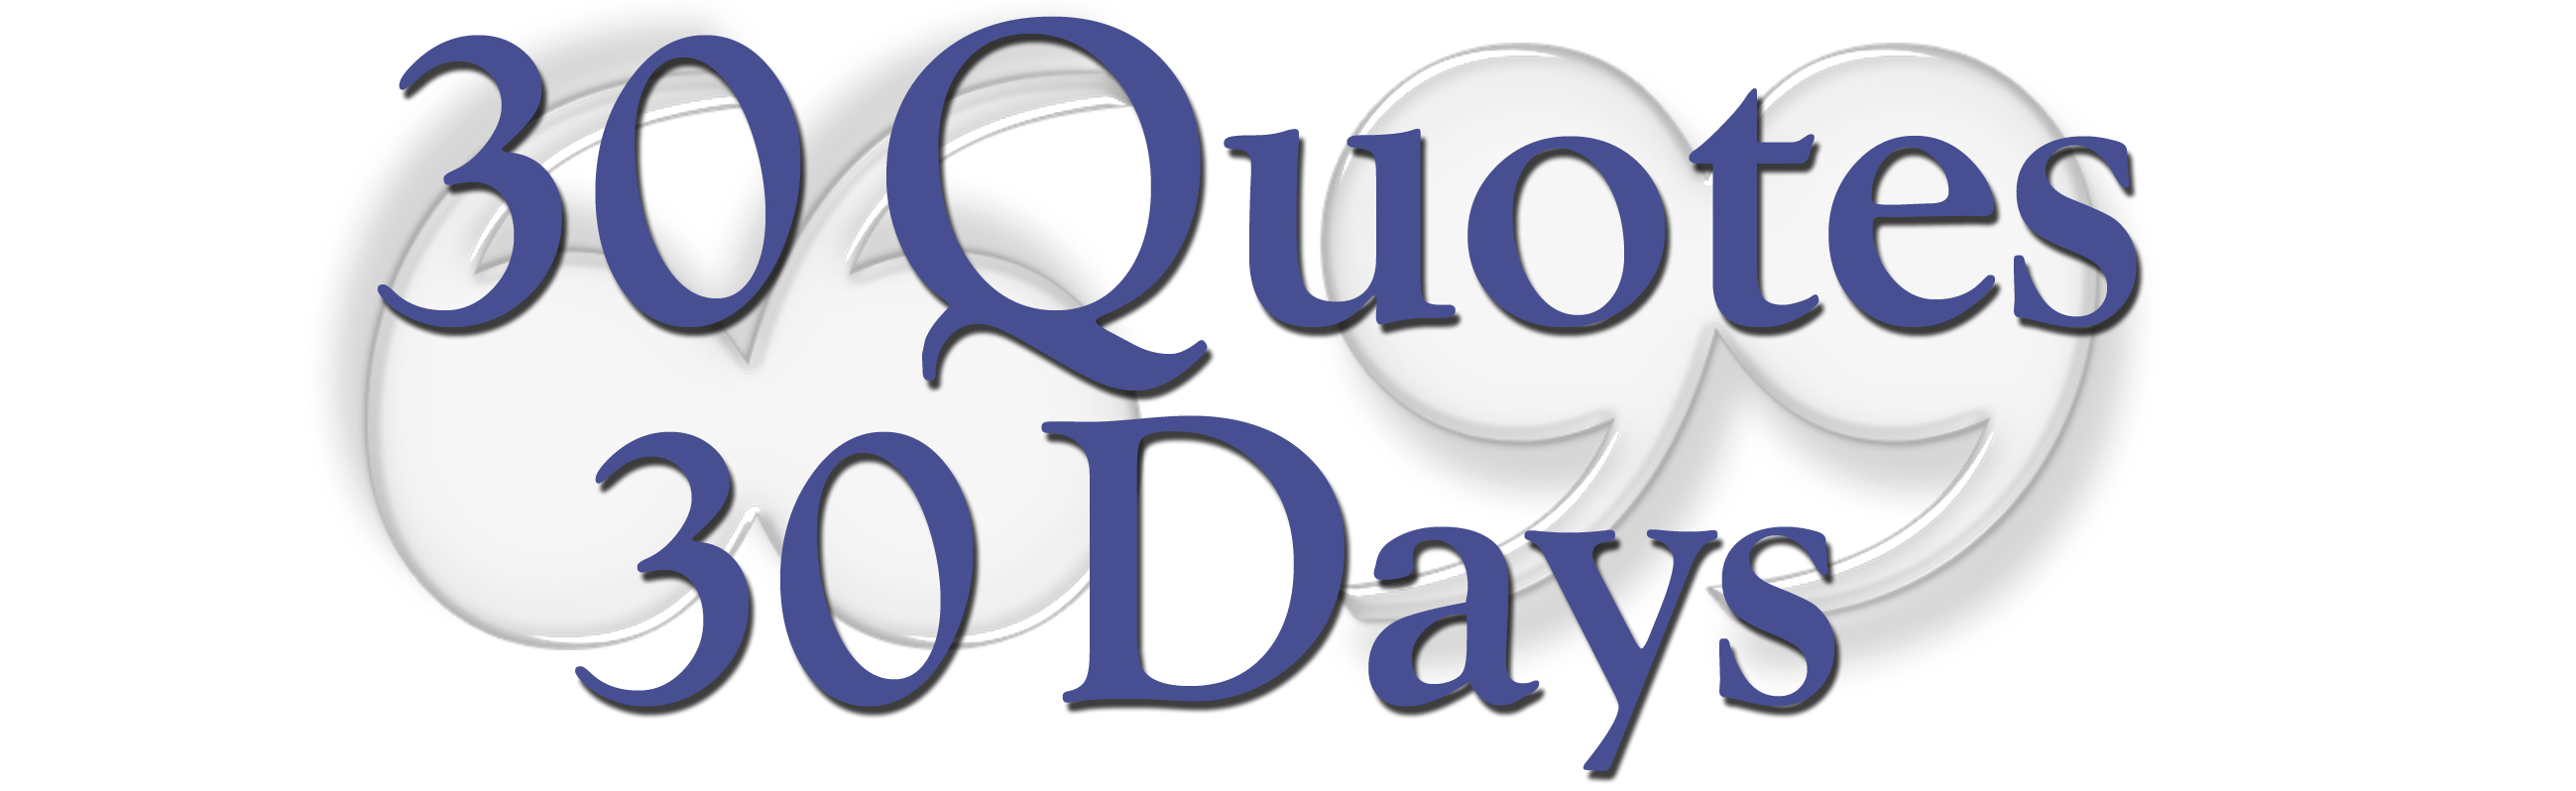 Another PoP moment resolved: “30 Quotes 30 Days”